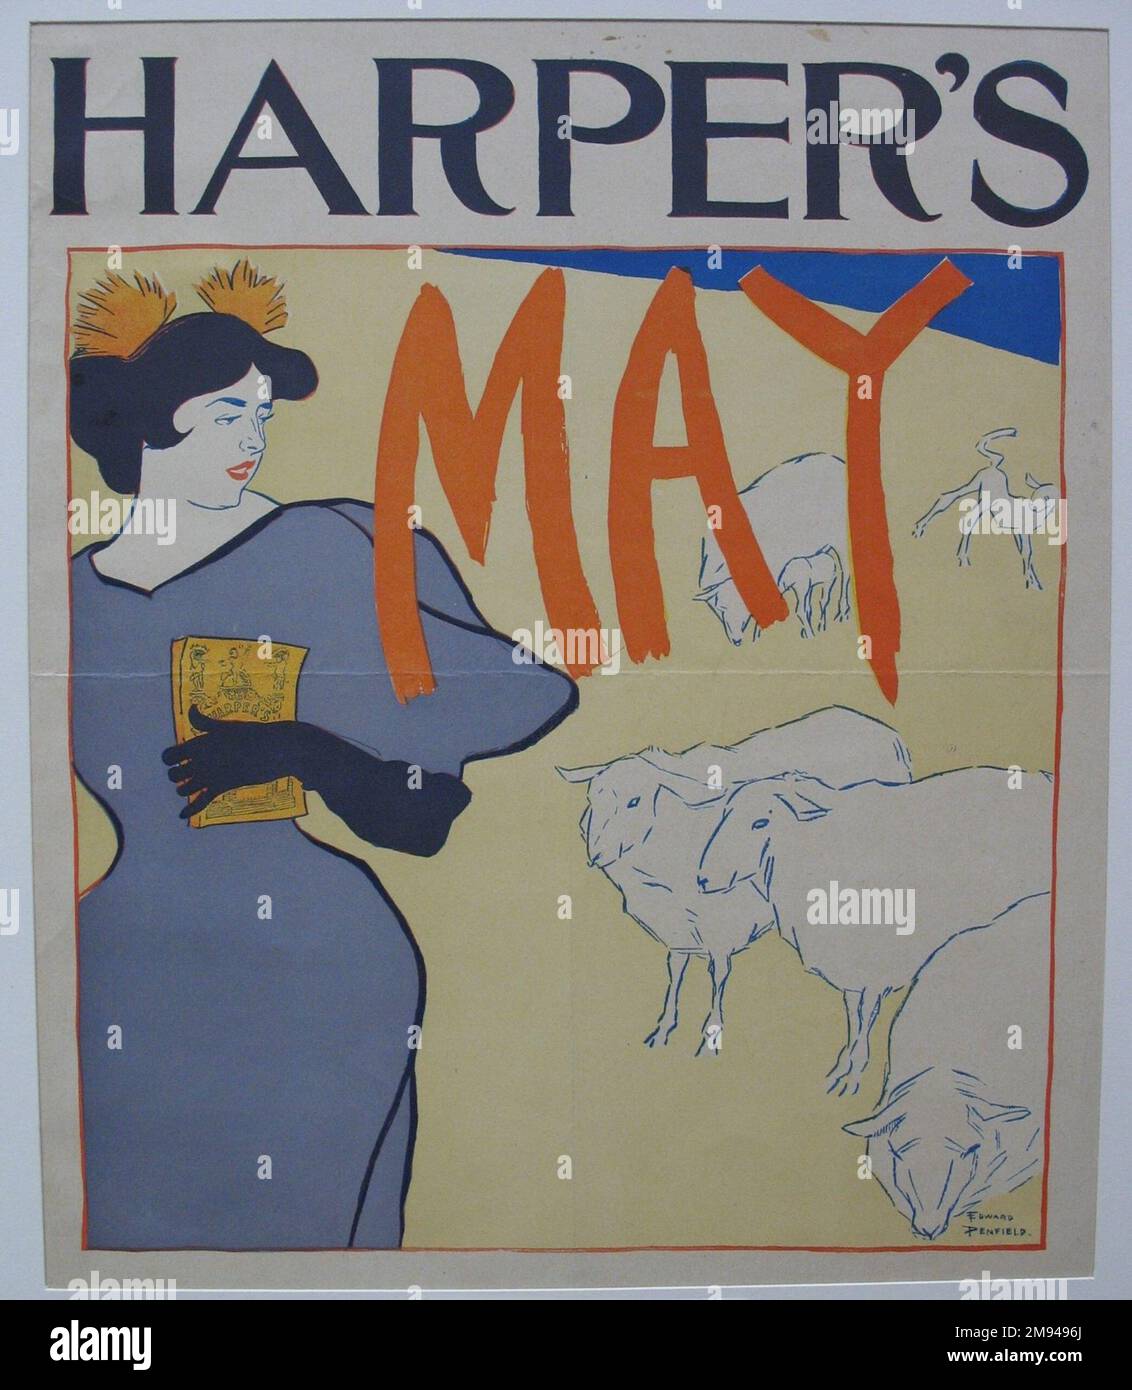 Harper's Poster - May 1895 Edward Penfield (American, 1866-1925). , 1895. Lithograph on wove paper, Sheet: 16 3/4 x 13 3/8 in. (42.5 x 34 cm).   American Art 1895 Stock Photo